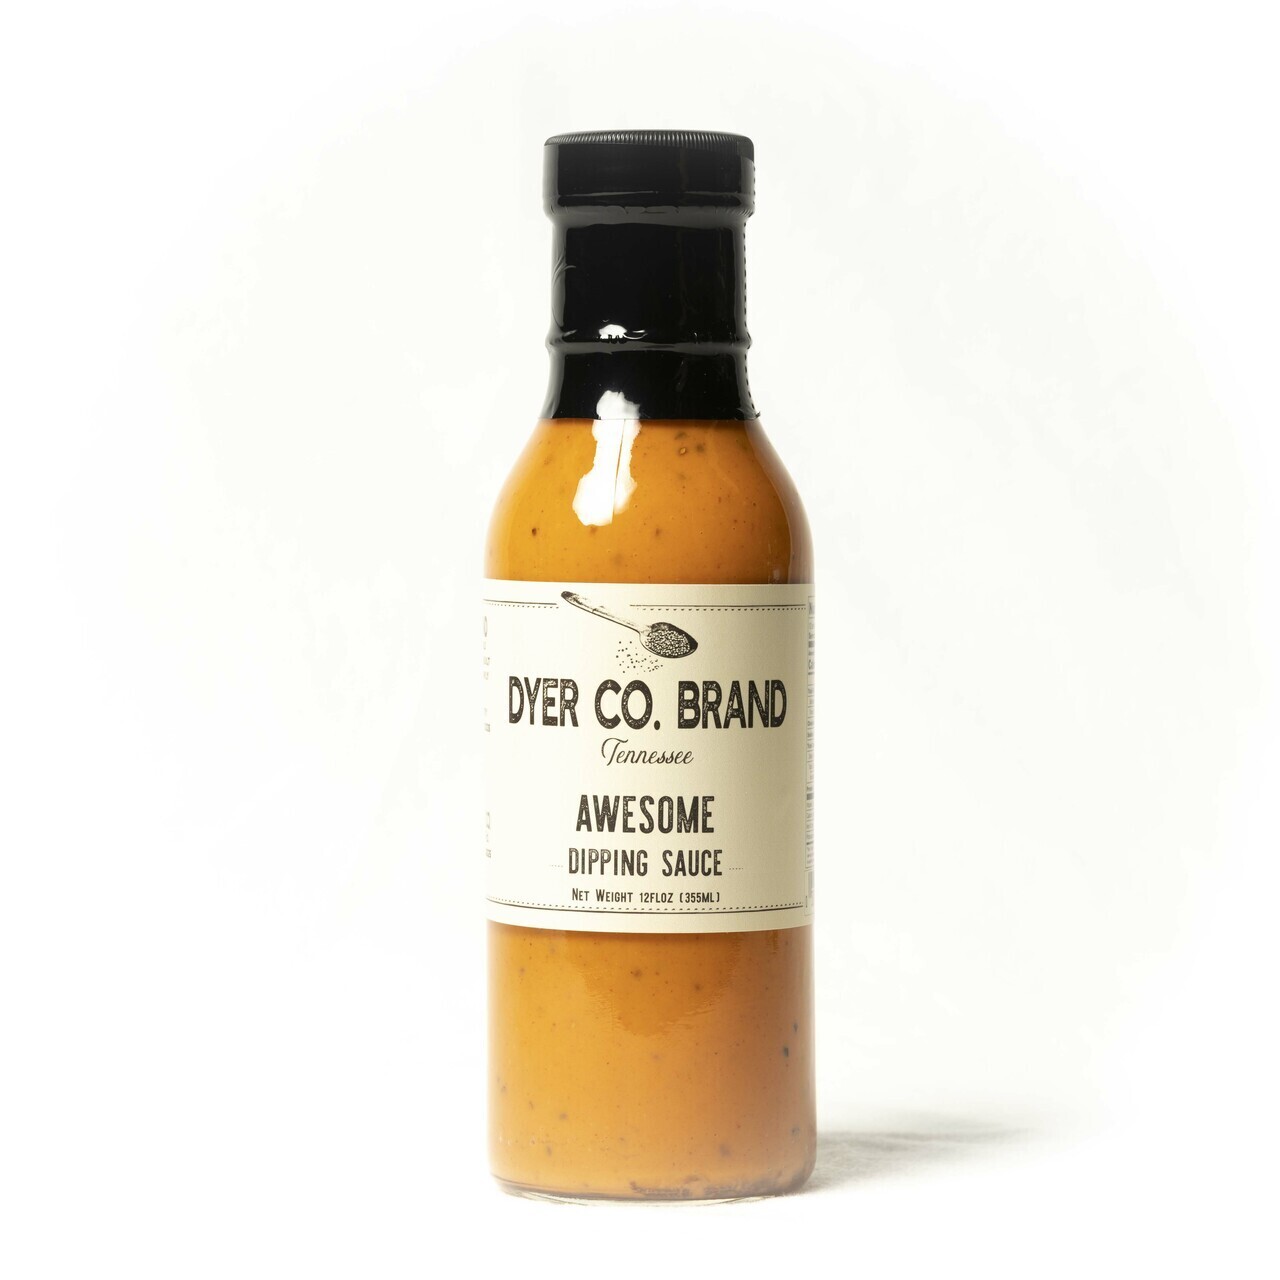 Dyer Co Brand Awesome Sauce